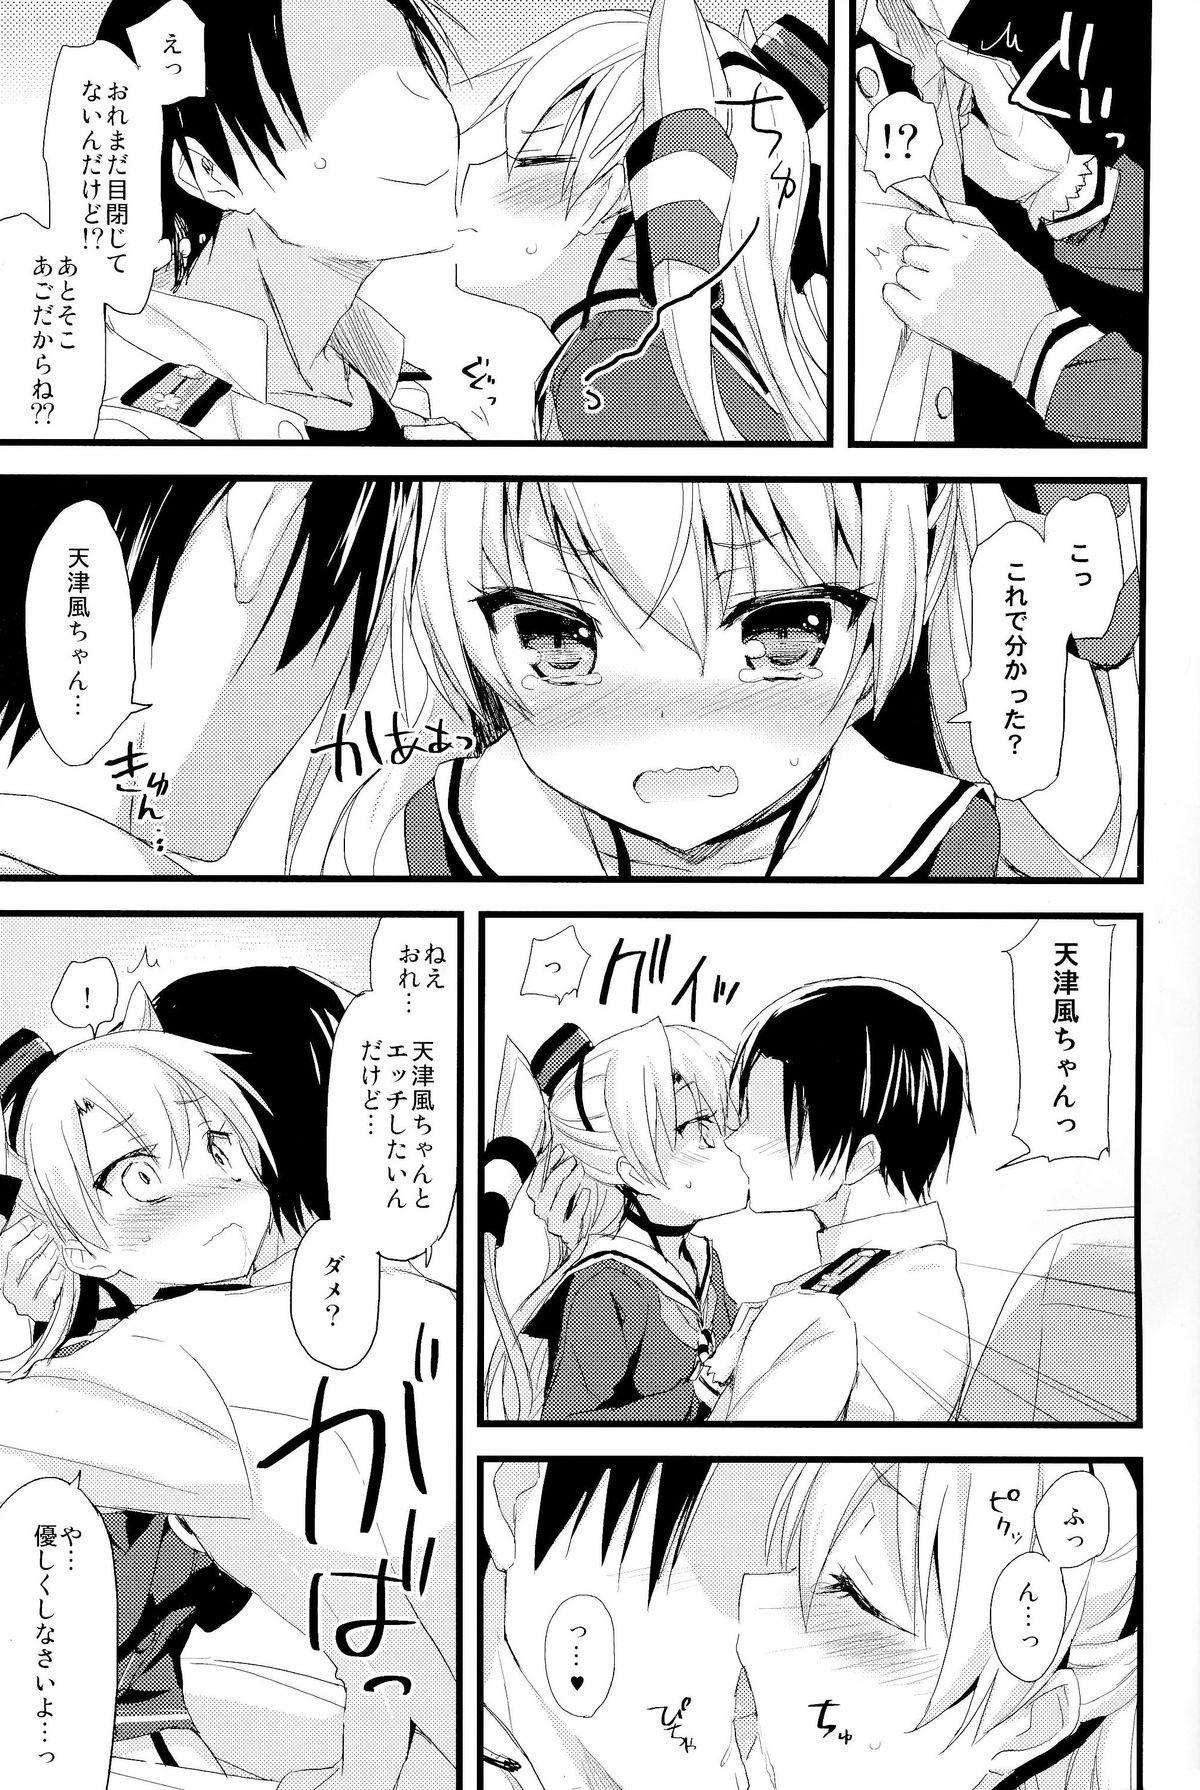 Free Hard Core Porn ∞Oooverheat↑ - Kantai collection Naked Women Fucking - Page 10